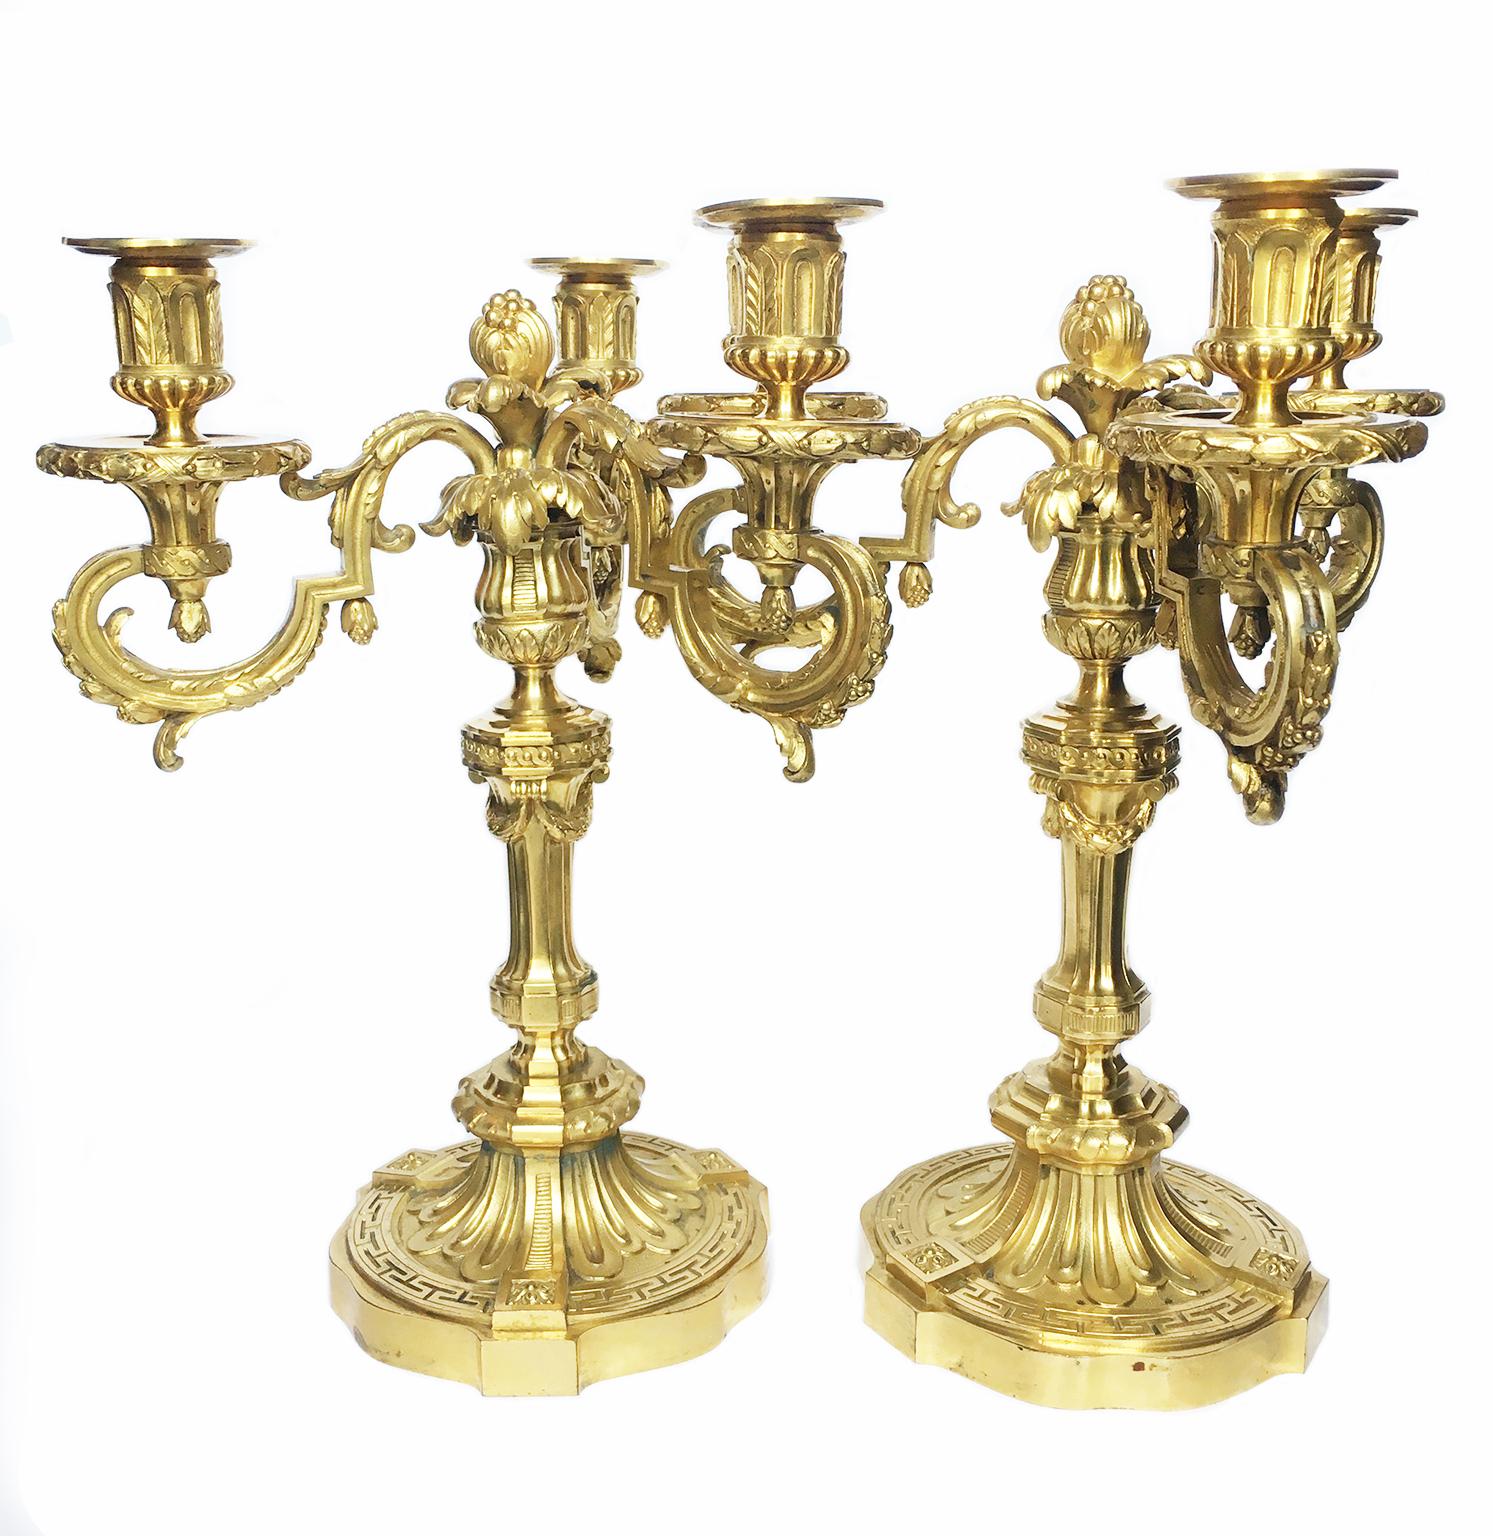 Pair of three-flame candelabra
Cast bronze, chiselled and mercury gilded 
France, third quarter of the nineteenth century
Height 14.96 in (38 cm) X 12.59 (32 cm)
Weight 11.46 lb (5.2 kg) each
State of conservation: very good

The two